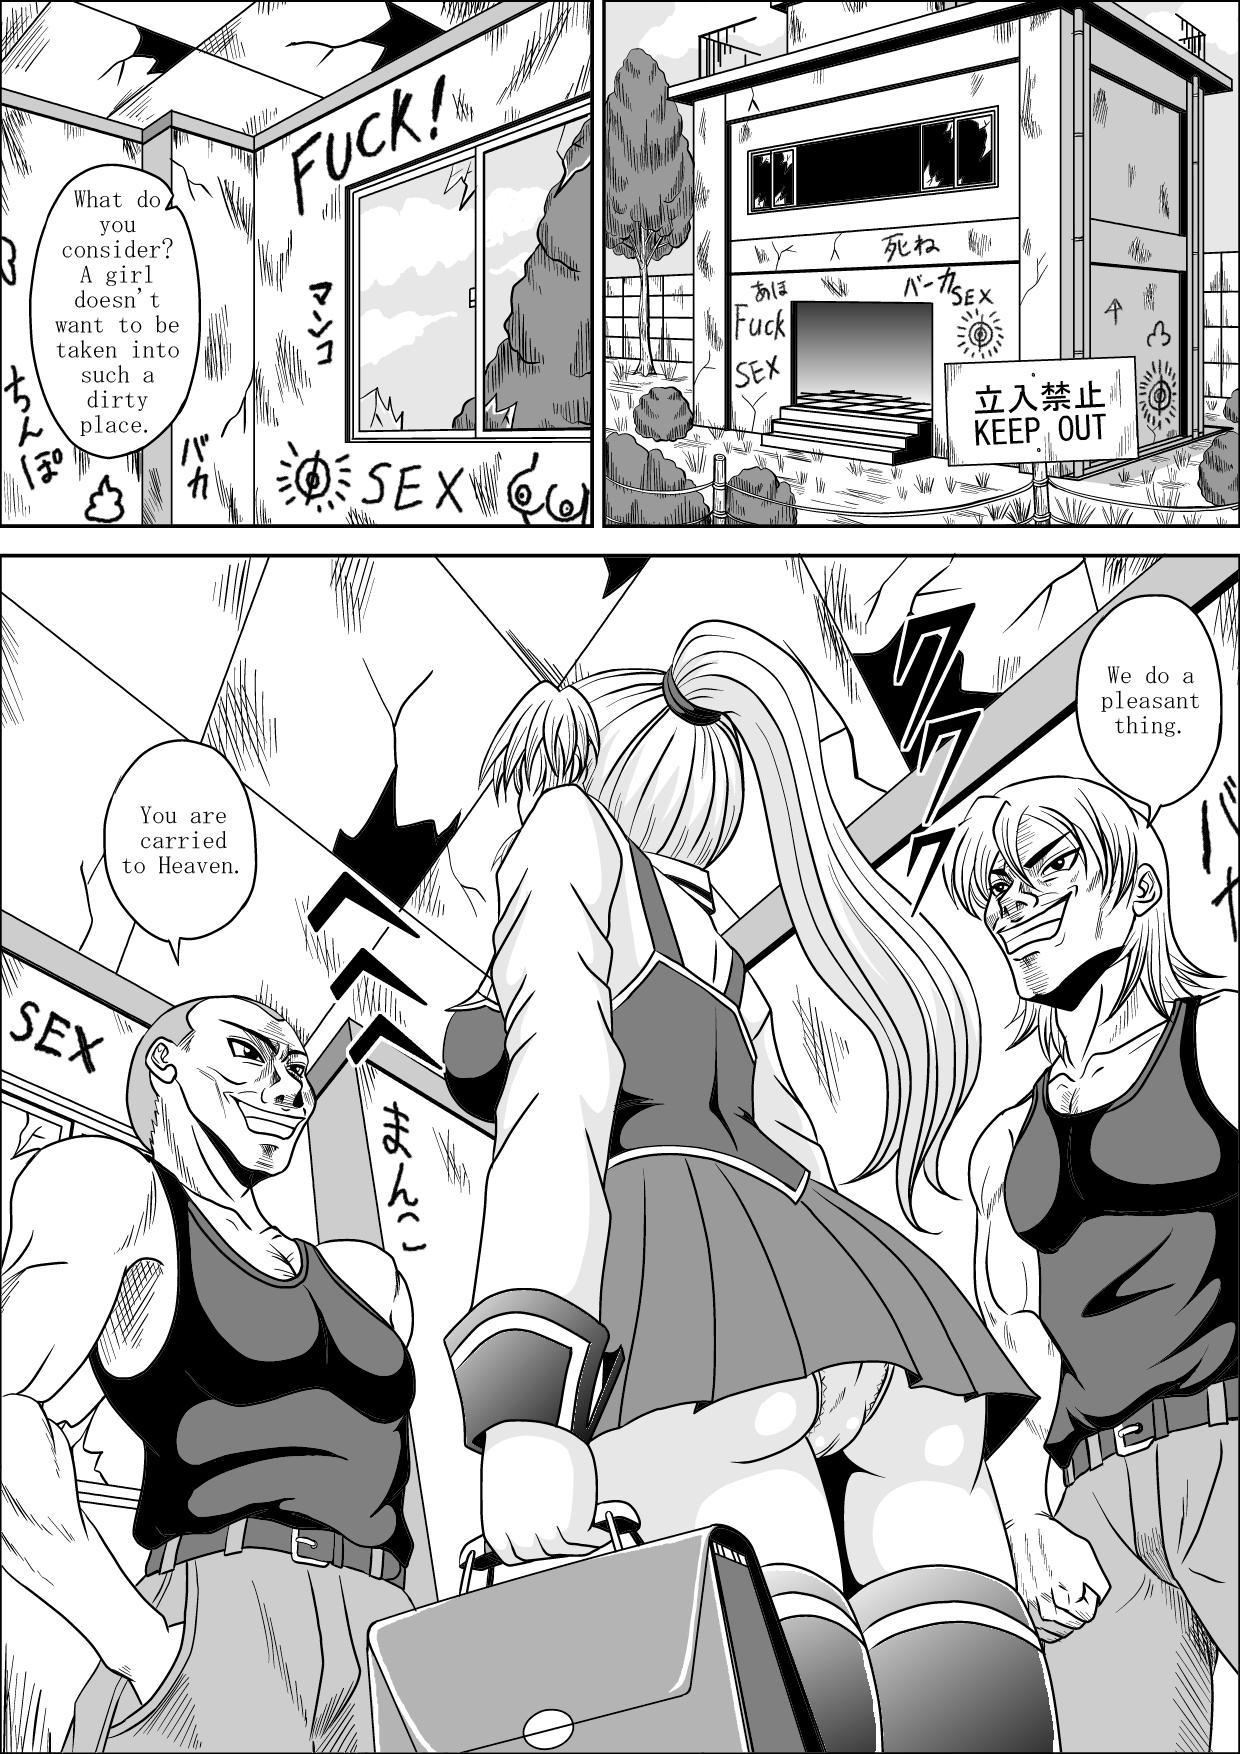 Making Love Porn Little Witch Fuck! - Bible black Jock - Page 3